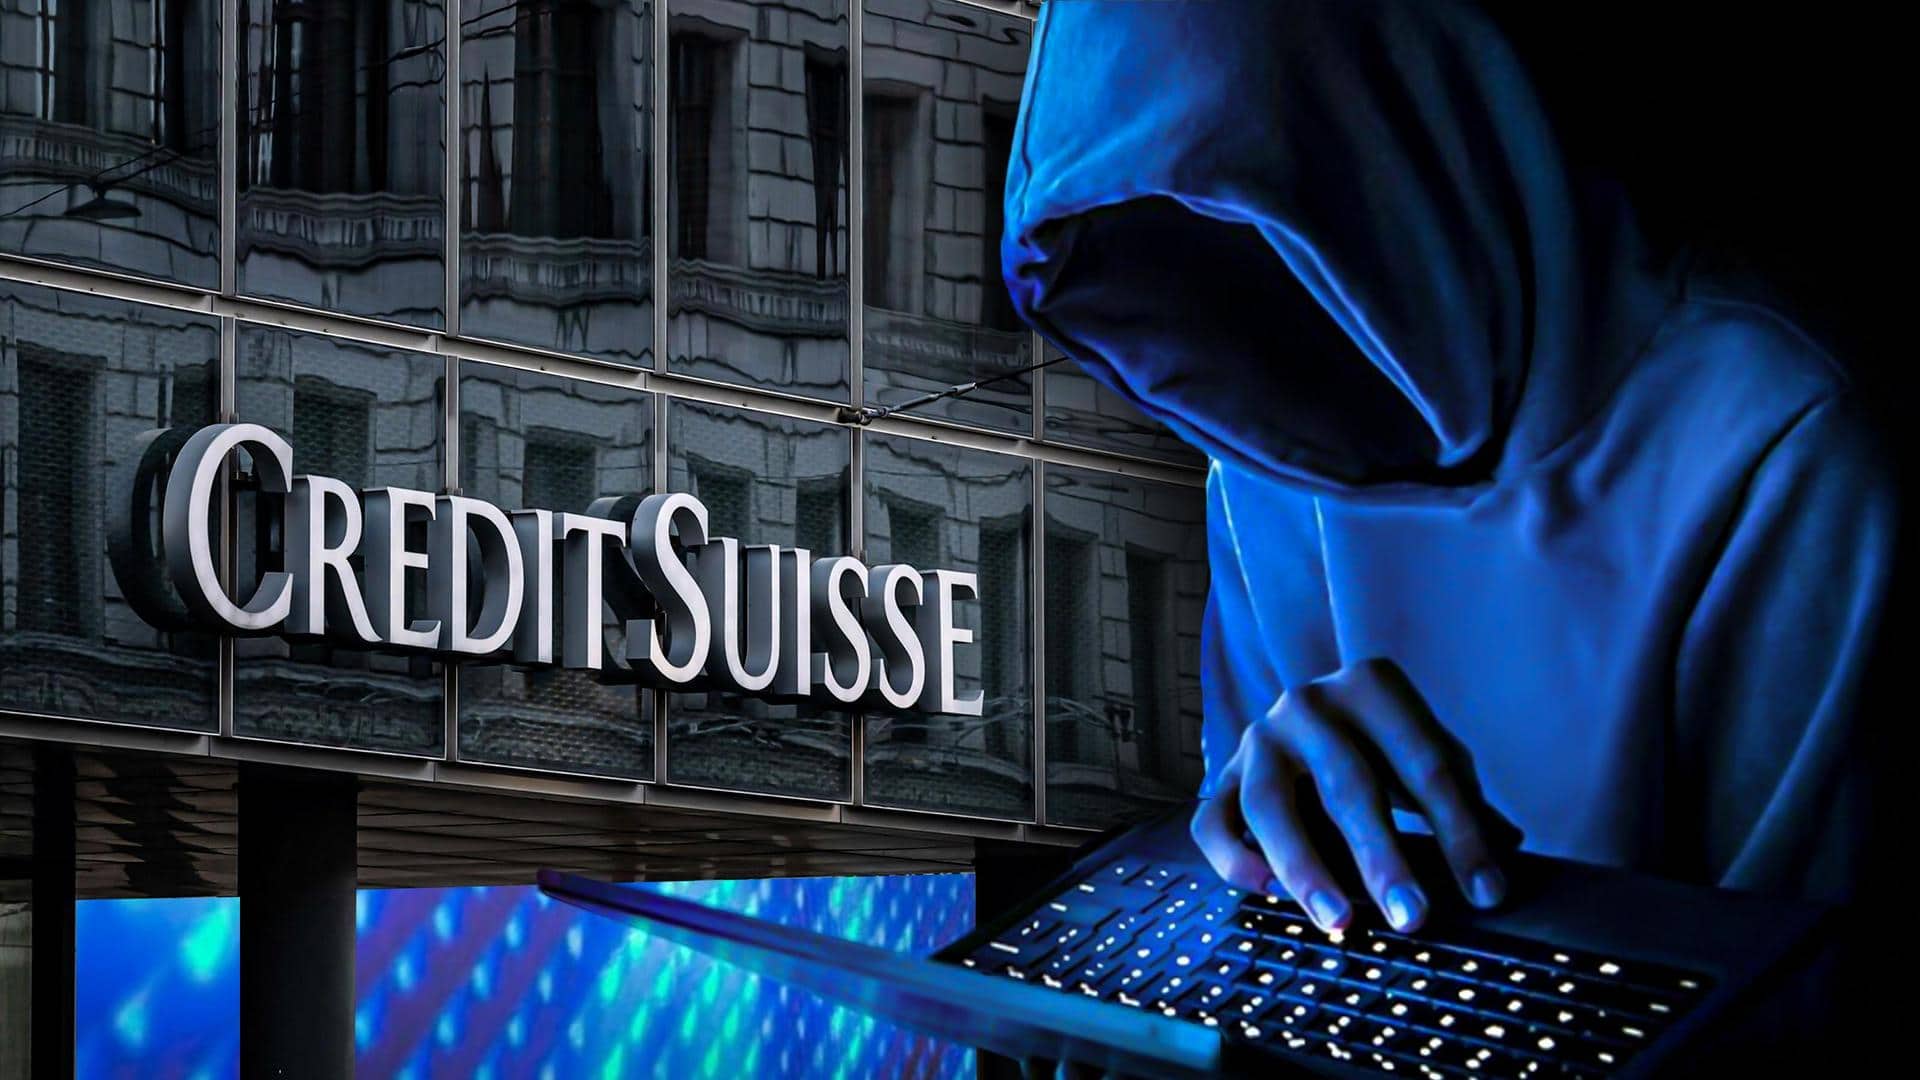 Ex-employee stole staff data of thousands, says Credit Suisse